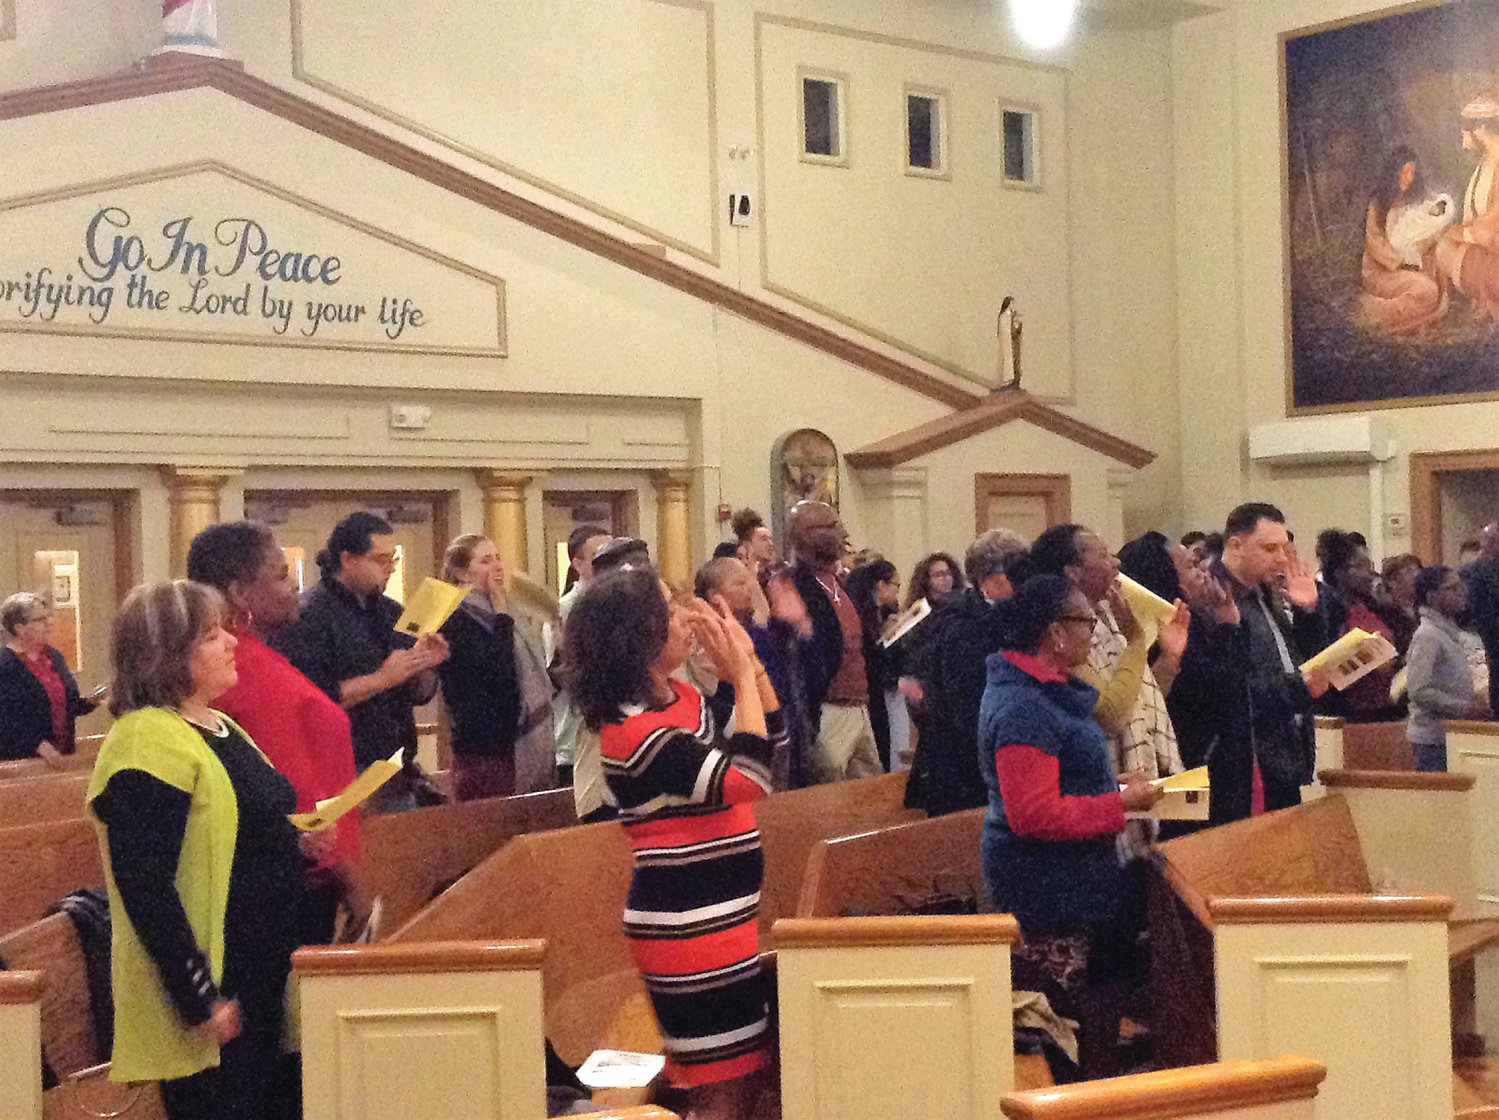 The crowd at the recent Black History Month celebration at St. Patrick Church, Providence, performs a simple dance together while singing “Ain’t Gonna Let Nobody Turn Me Around.”  The celebration was originally scheduled for February 12, but inclement weather forced a postponement.